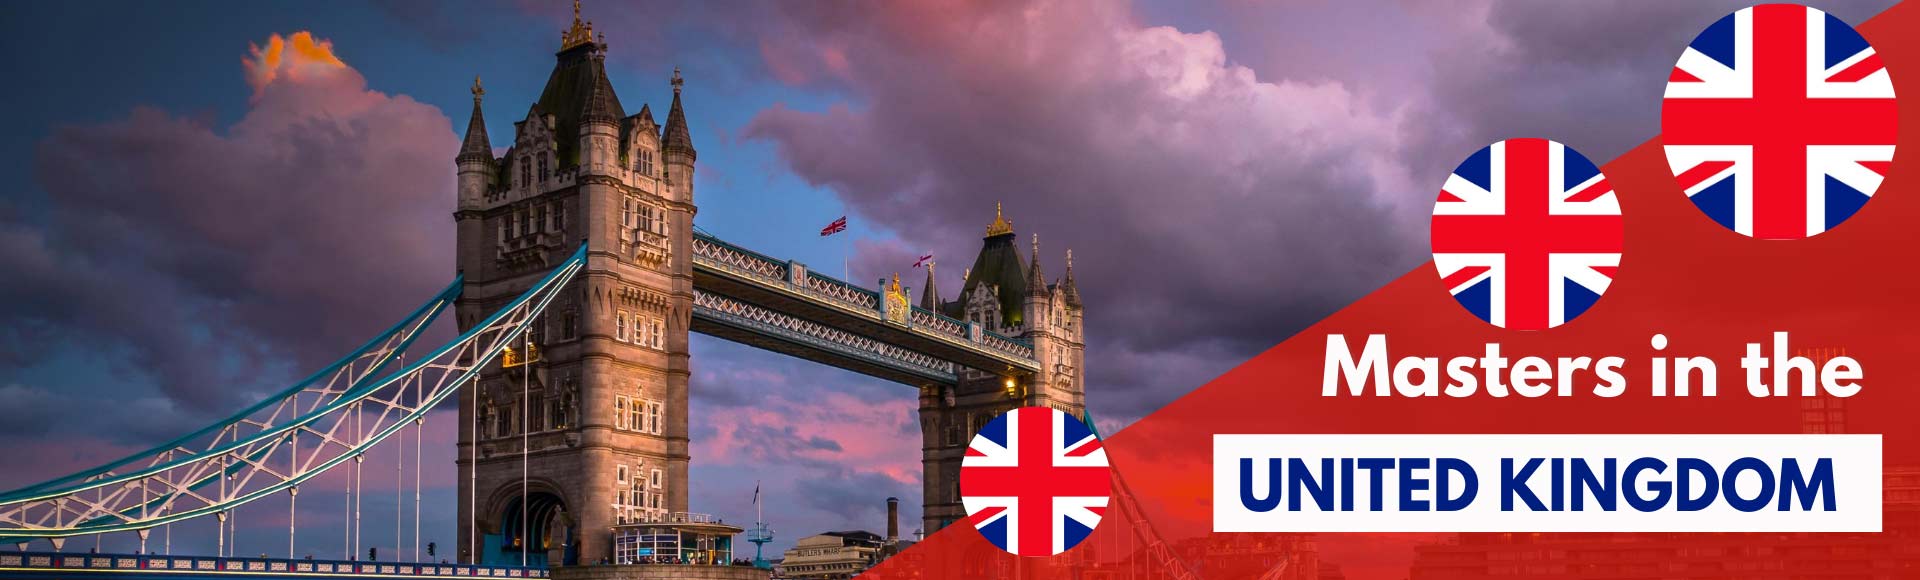 Masters Degree In Uk - Steps To Apply For Uk Study Visa